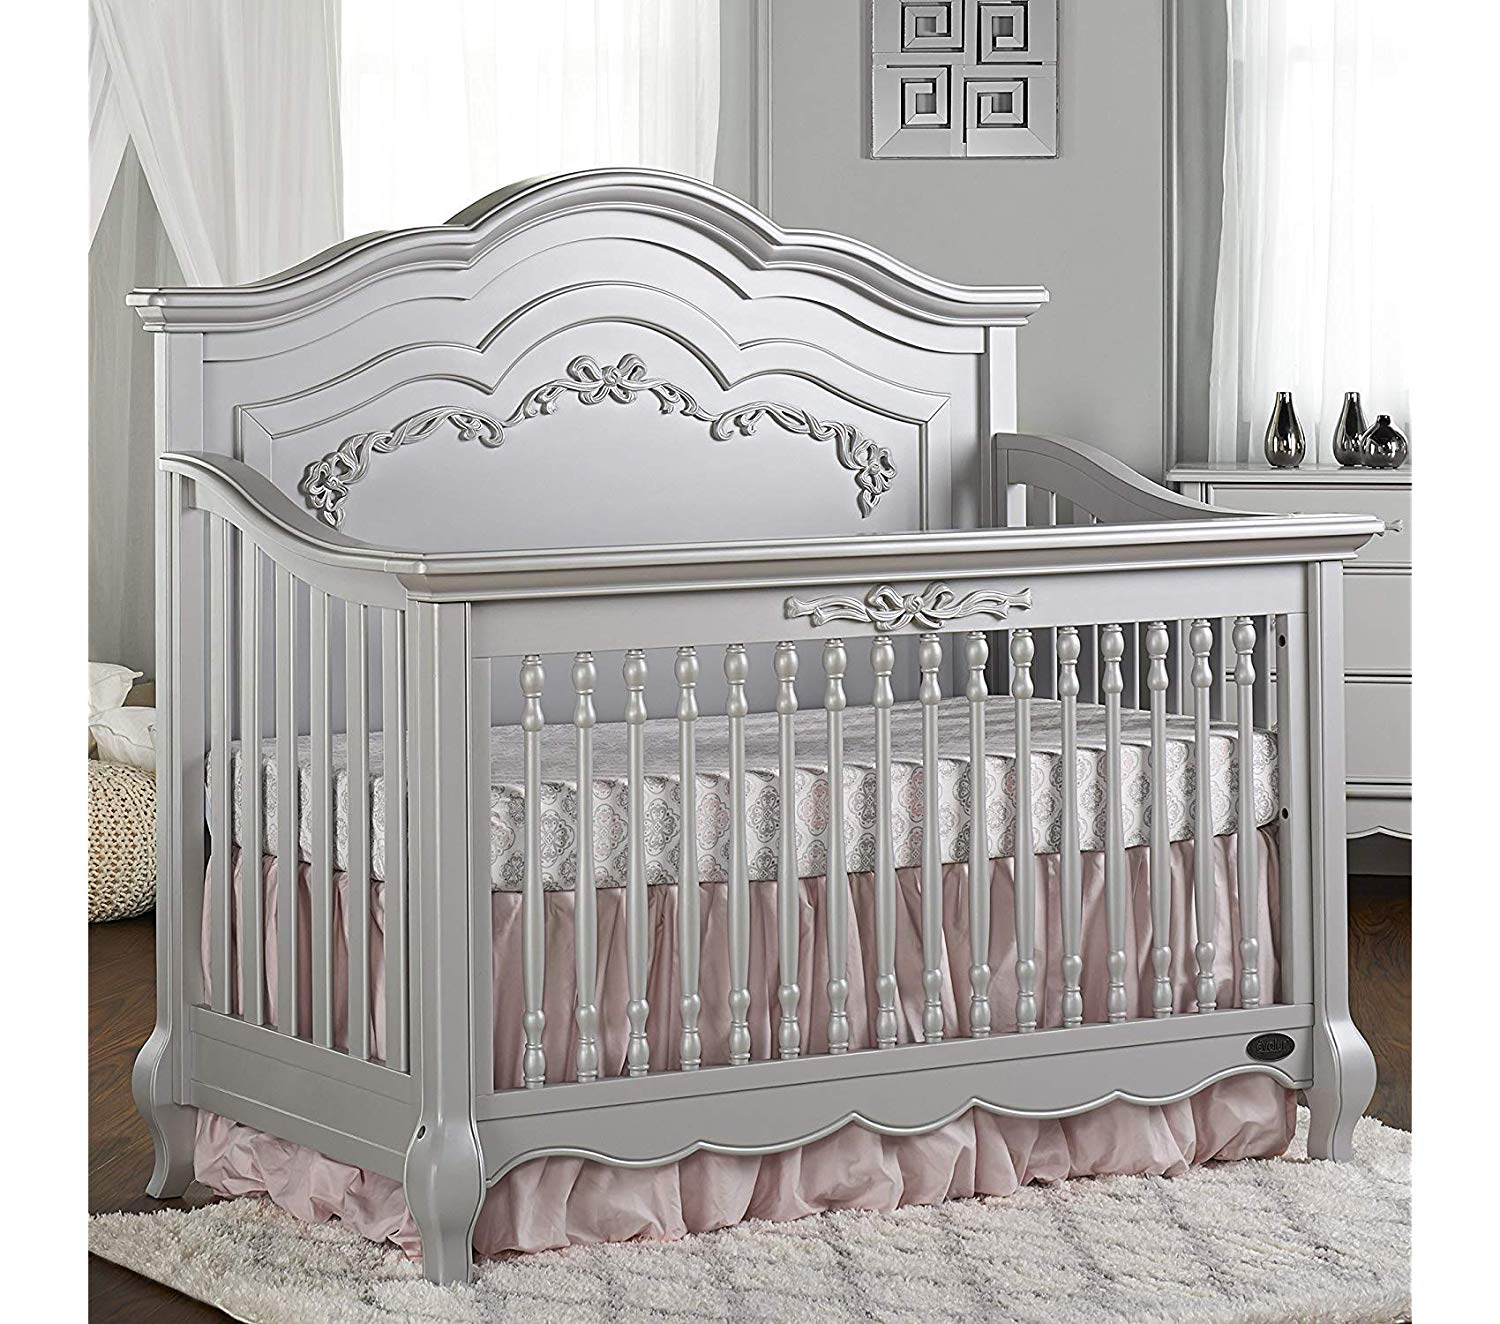 Еvоlur Deluxe Premium Collection 5-in-1 Convertible Crib Ivory Lace